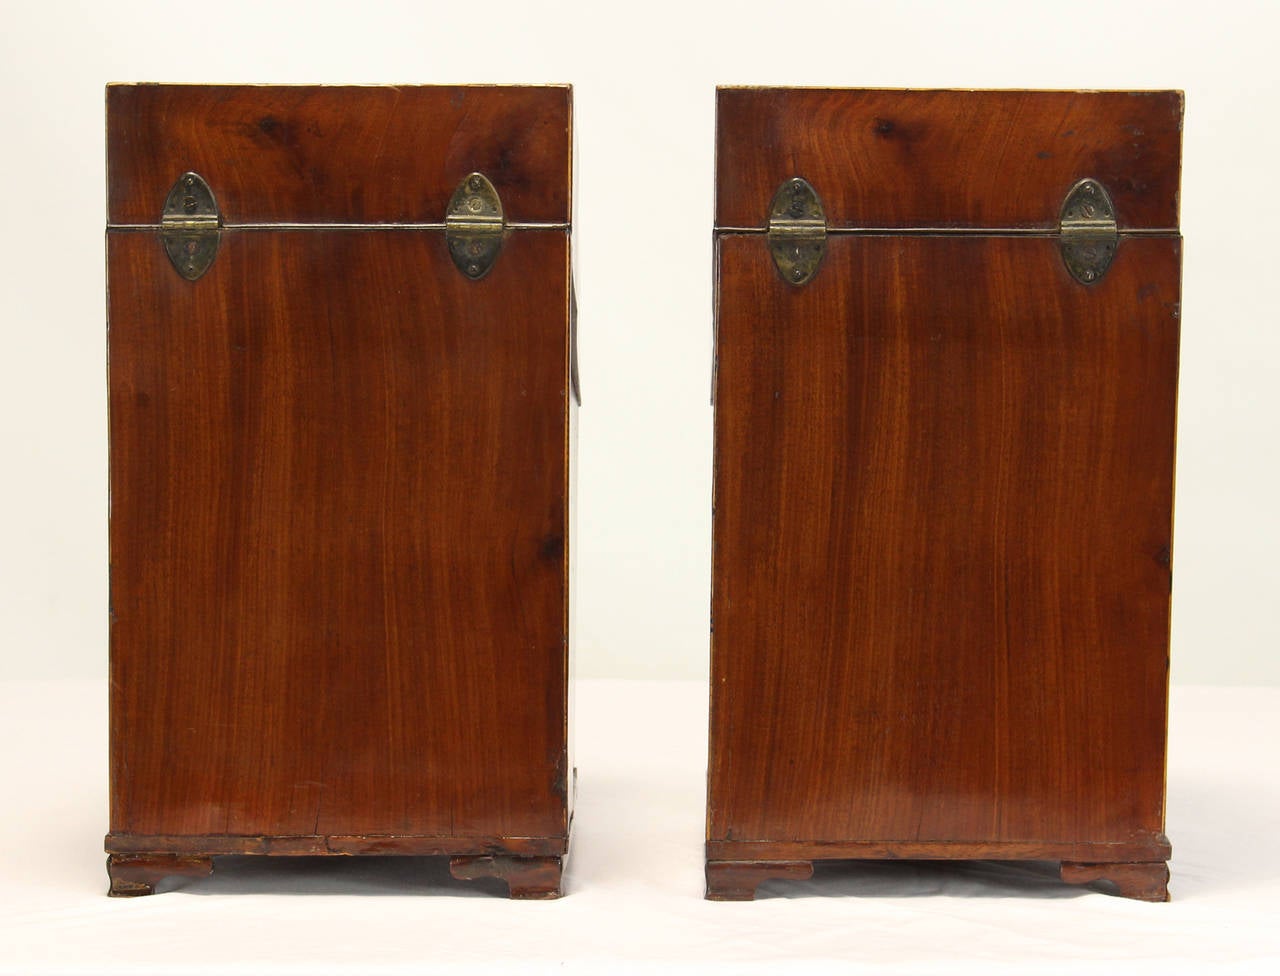 Great Britain (UK) Pair of Late 18th Century English Knife Boxes